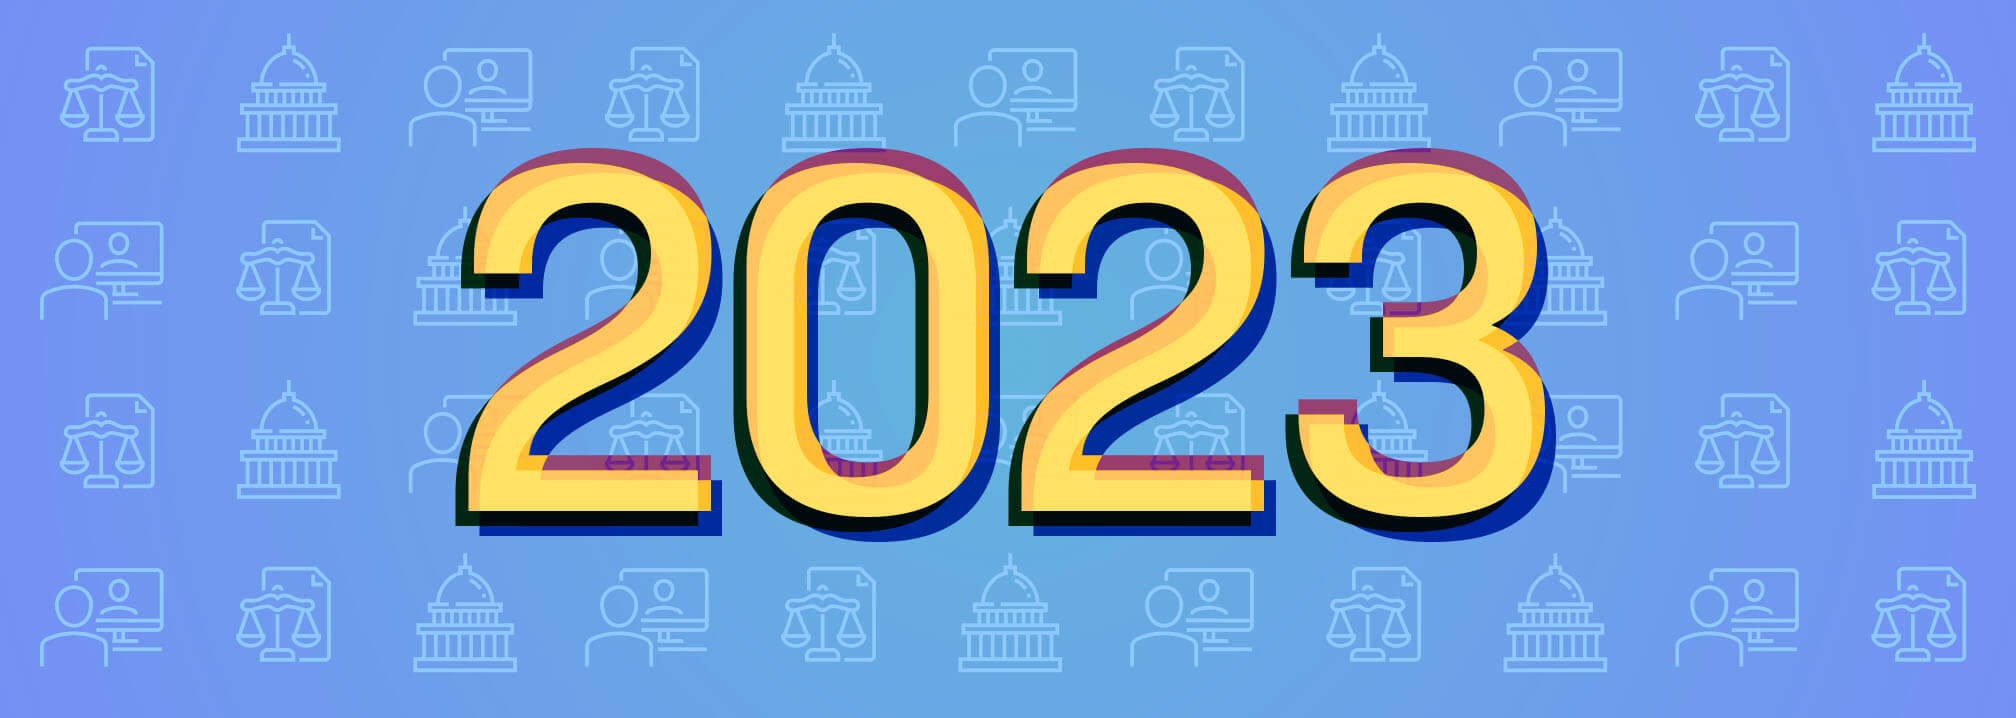 2023 in large letters over a pattern of legislative iconography